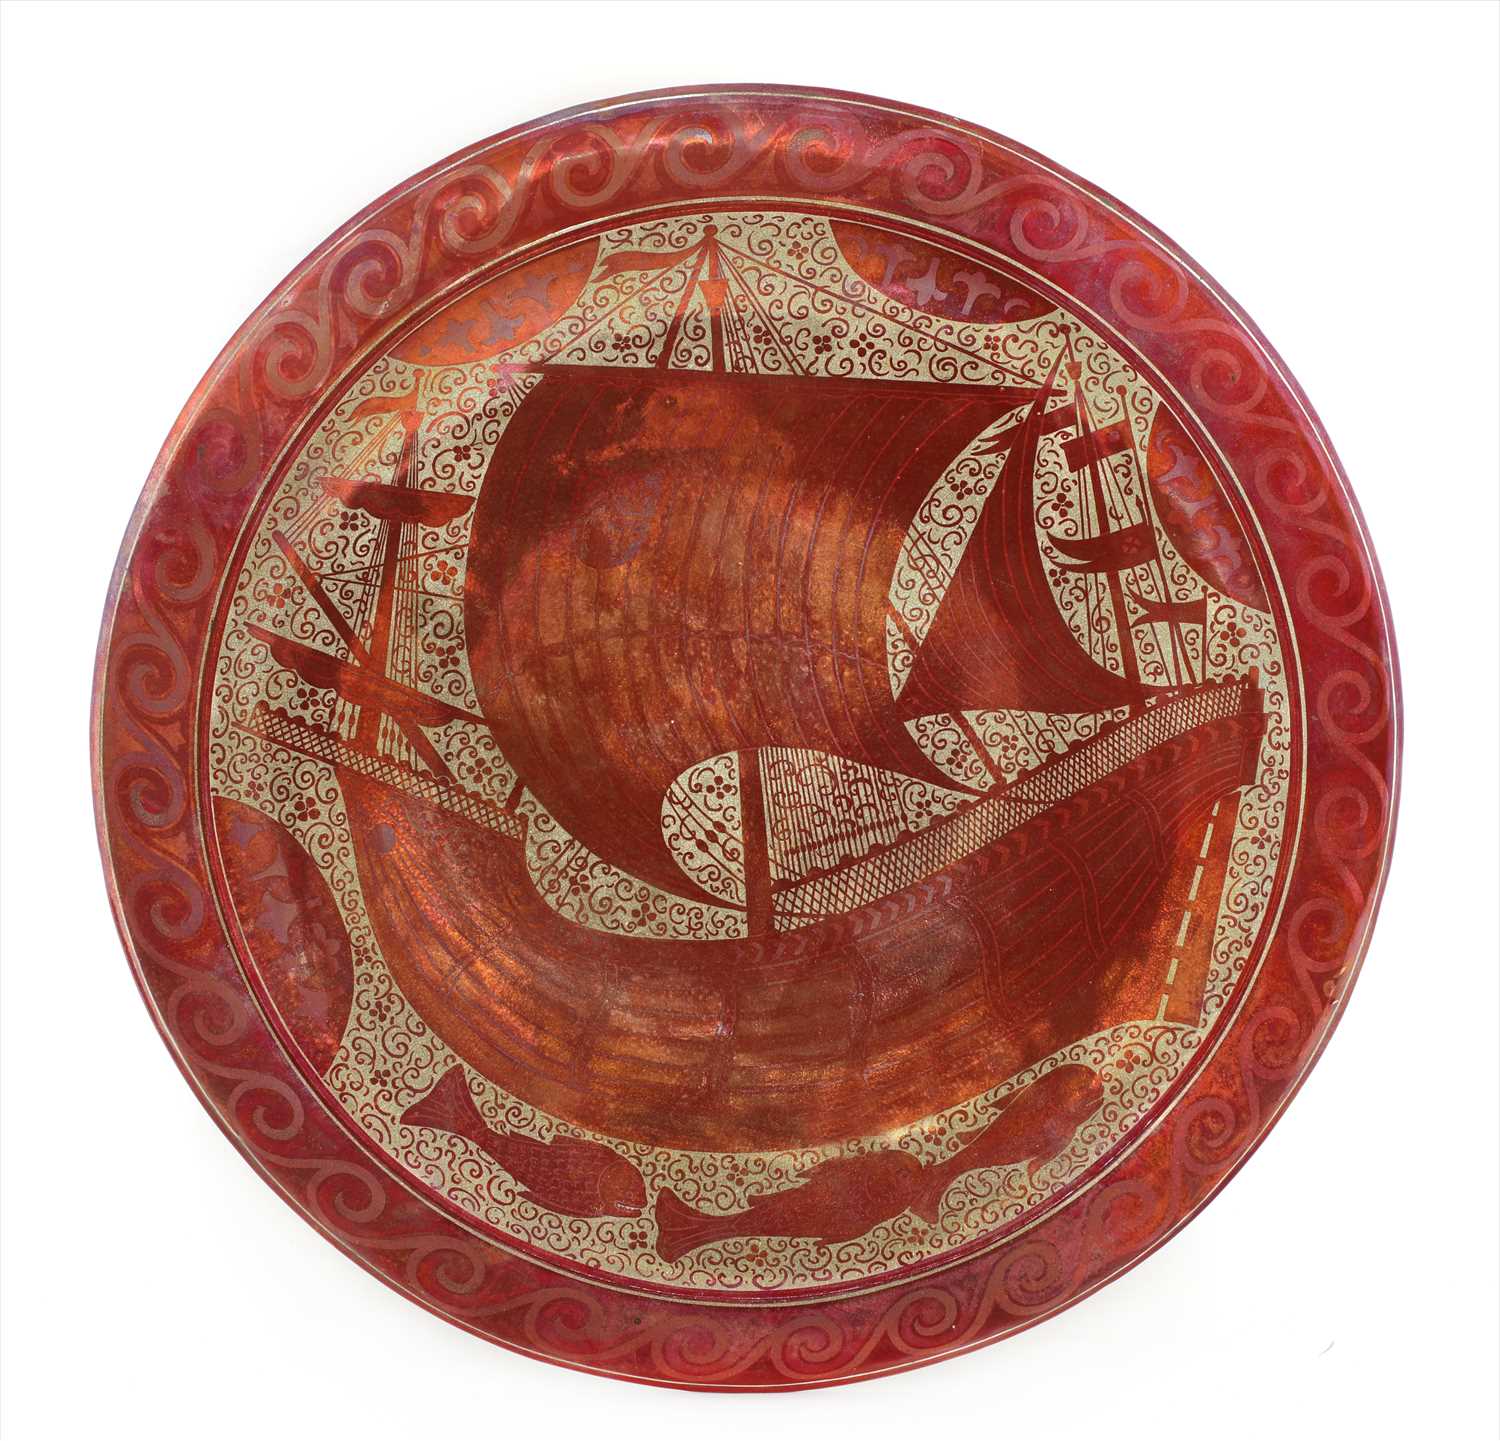 Lot 151 - An earthenware lustre charger by Maw & Co, Jackfield